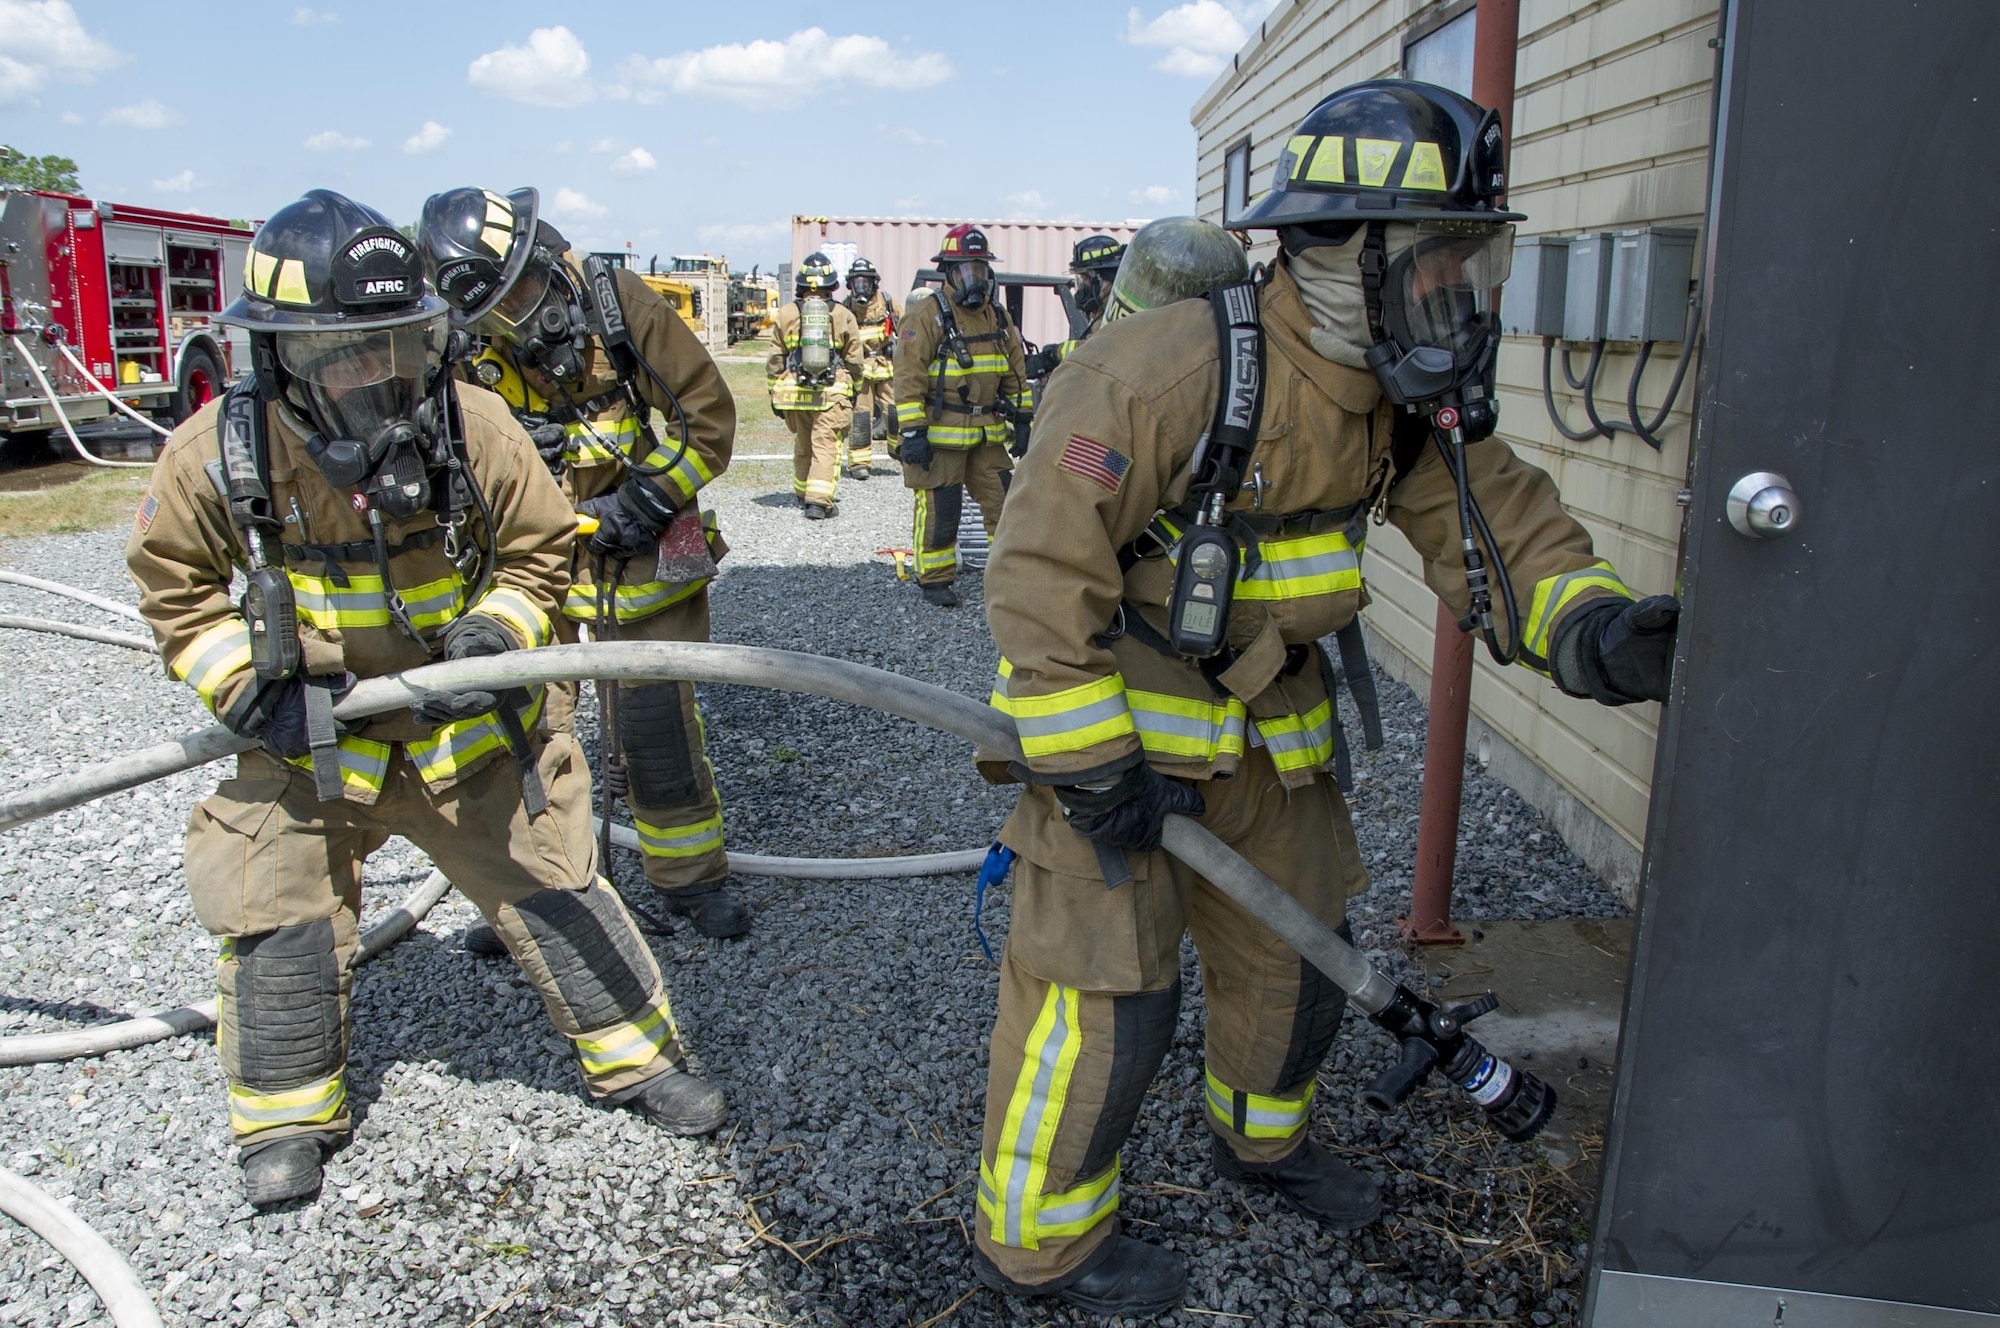 Air Force Reserve firefighters enter a building to extinguish a live fire during the first-ever Air Force Reserve Command Firefighter Rescue and Survival Course at Dobbins Air Reserve Base, Ga., April 18, 2017. Twenty Citizen Airmen participated in the intense 50-hour course held at the 622nd Civil Engineer Group expeditionary combat support-training certification center, which focused on a Rapid Intervention Crew, or RIC. The RIC is a dedicated and specially trained group of firefighters whose responsibilities include safely evacuating a distressed firefighter from a structure. (U.S. Air Force photo by Master Sgt. Theanne K. Herrmann)